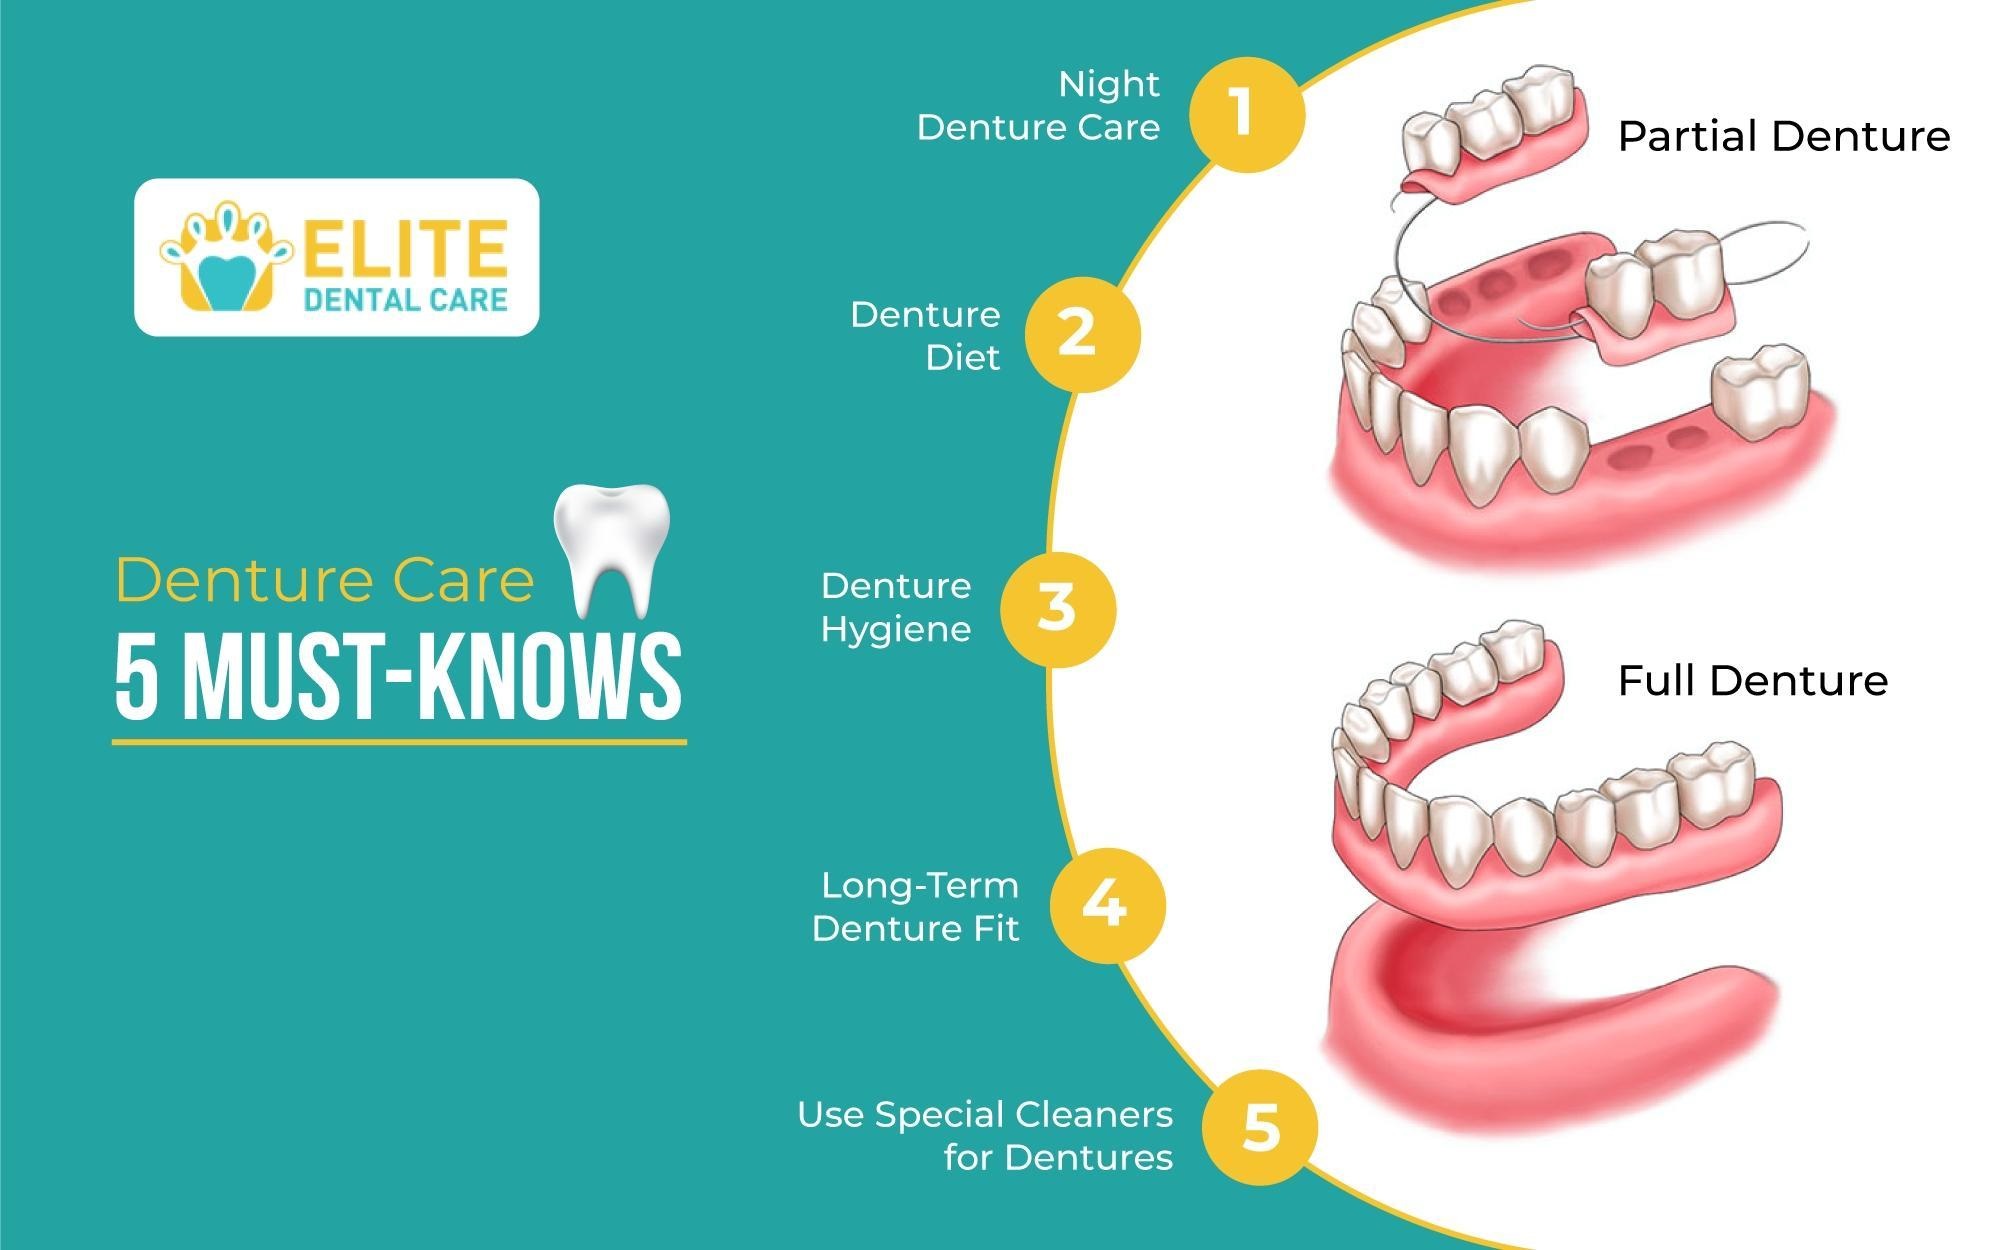 5 Things You Should Know If You Have Dentures